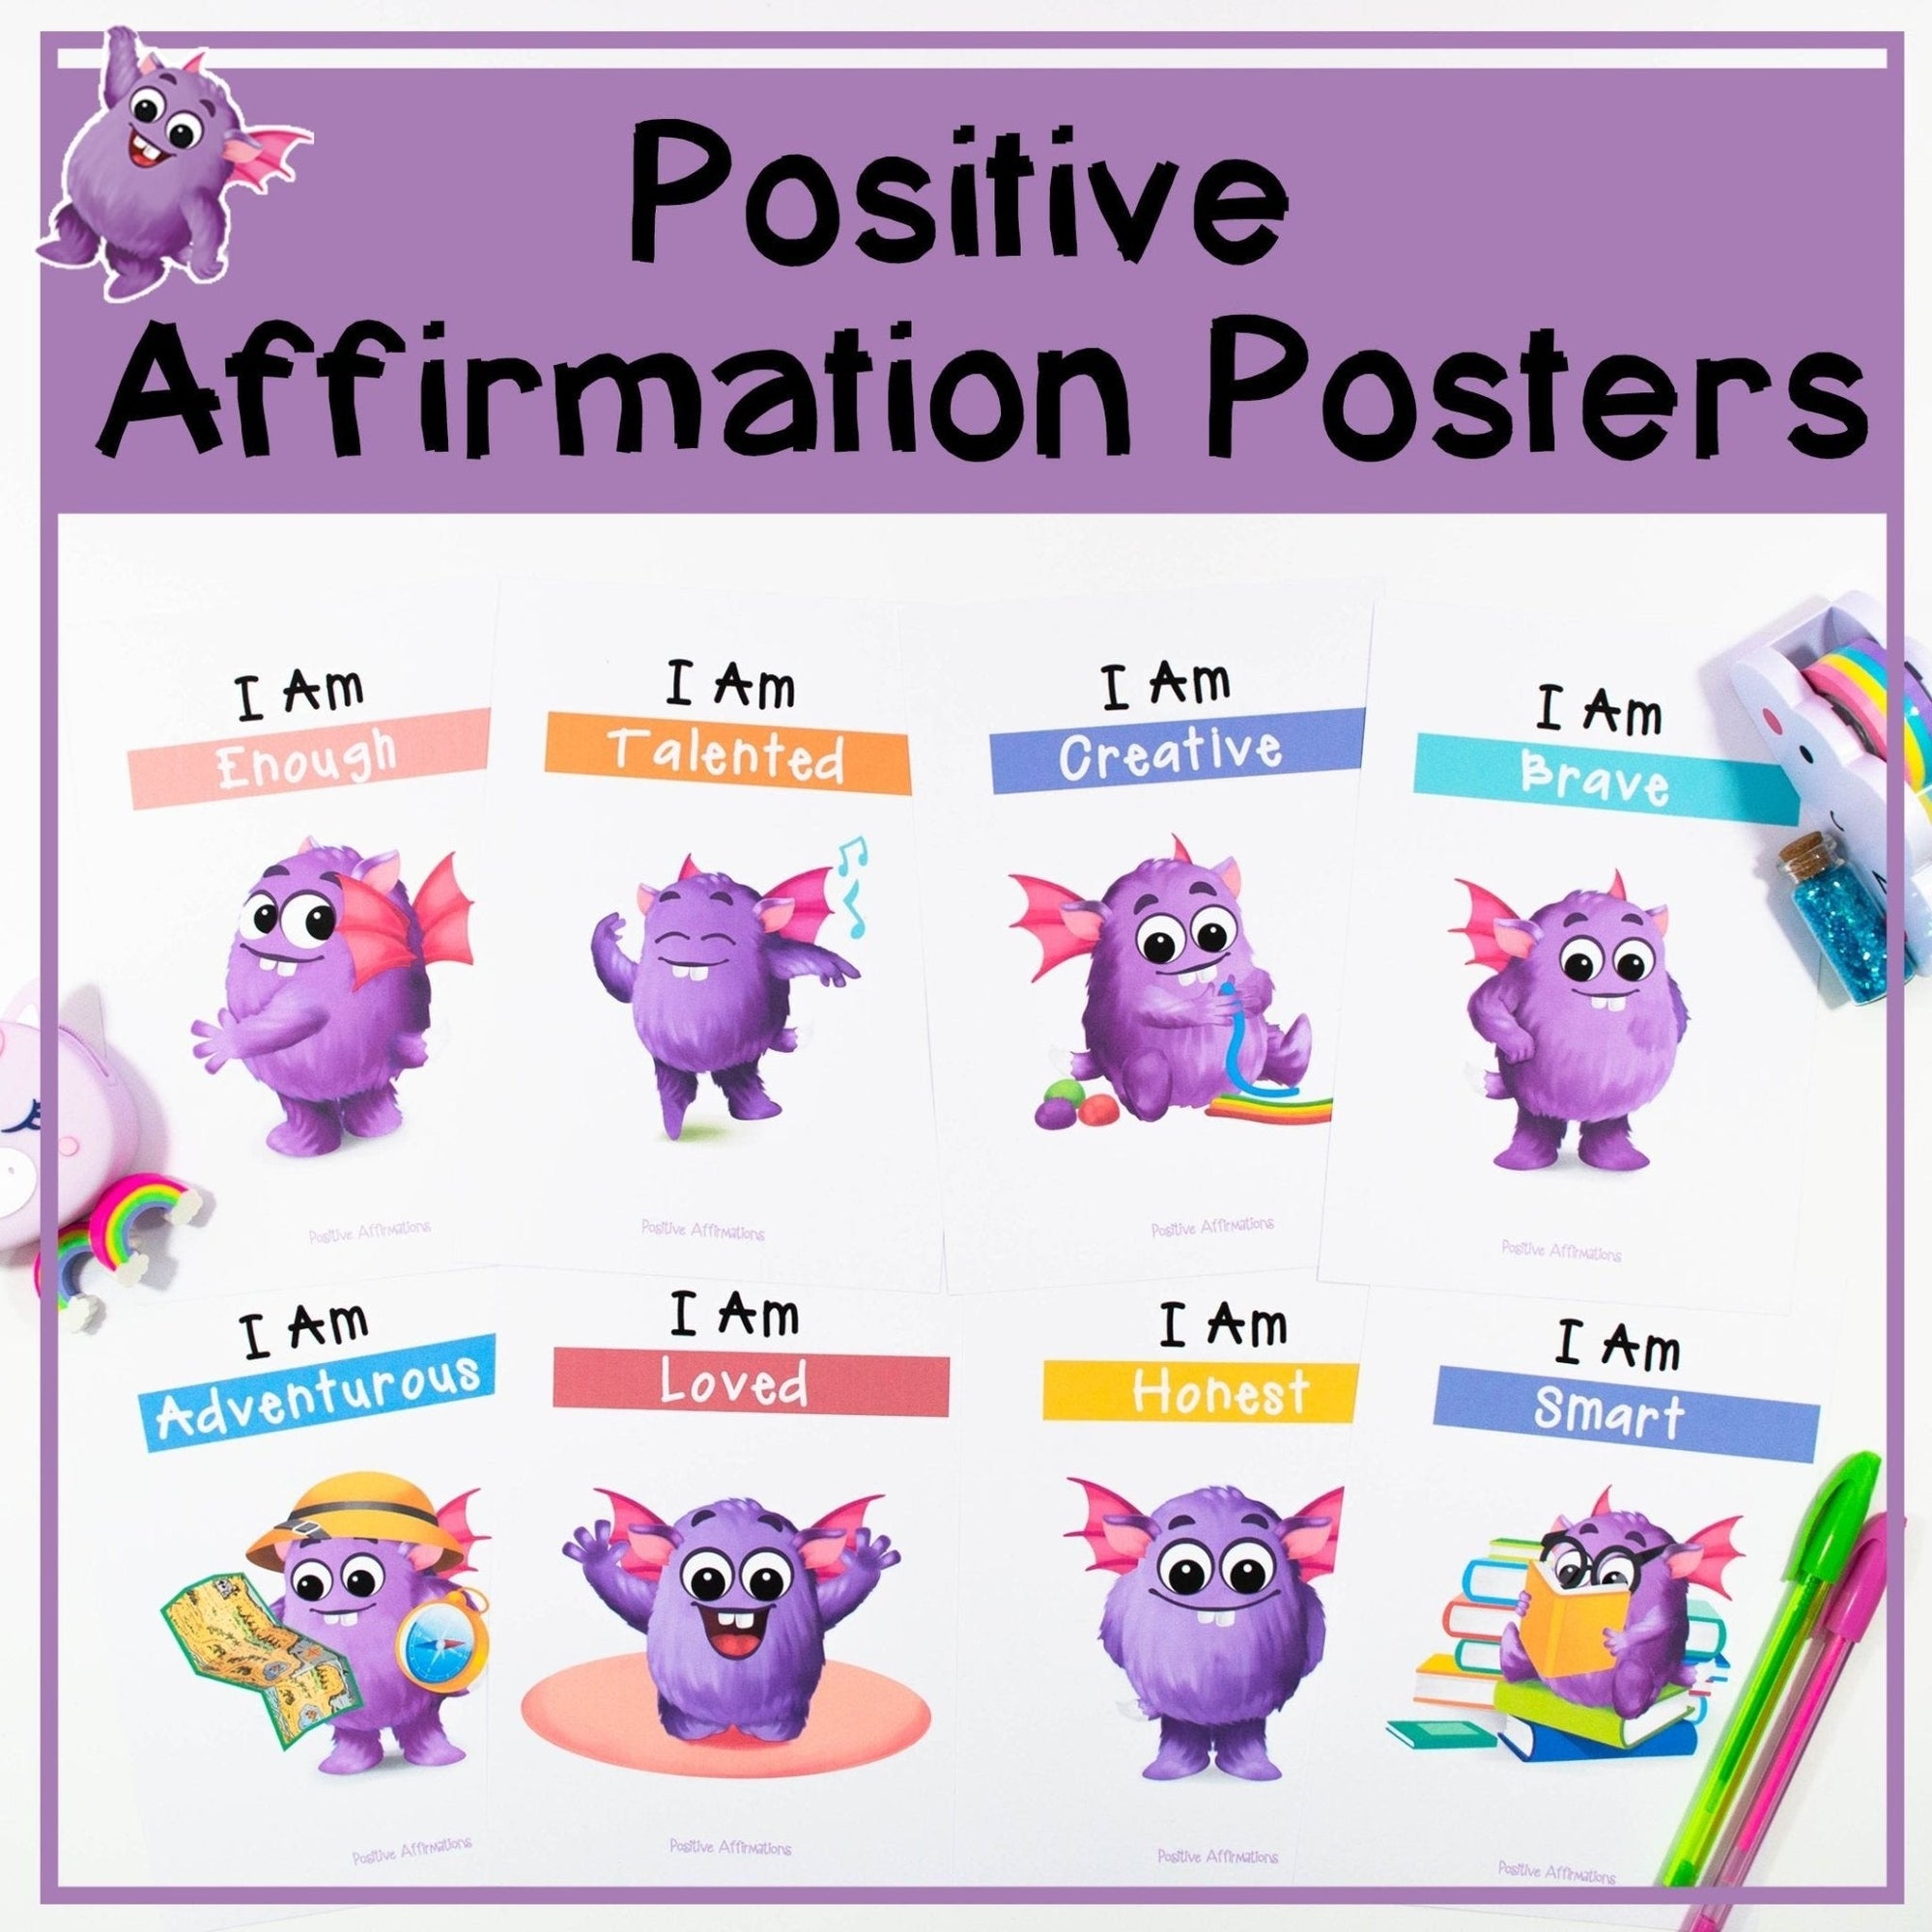 Positive Affirmation Posters - Positive Mindset Poster Pack for A4 or A3 format - Your Teacher's Pet Creature